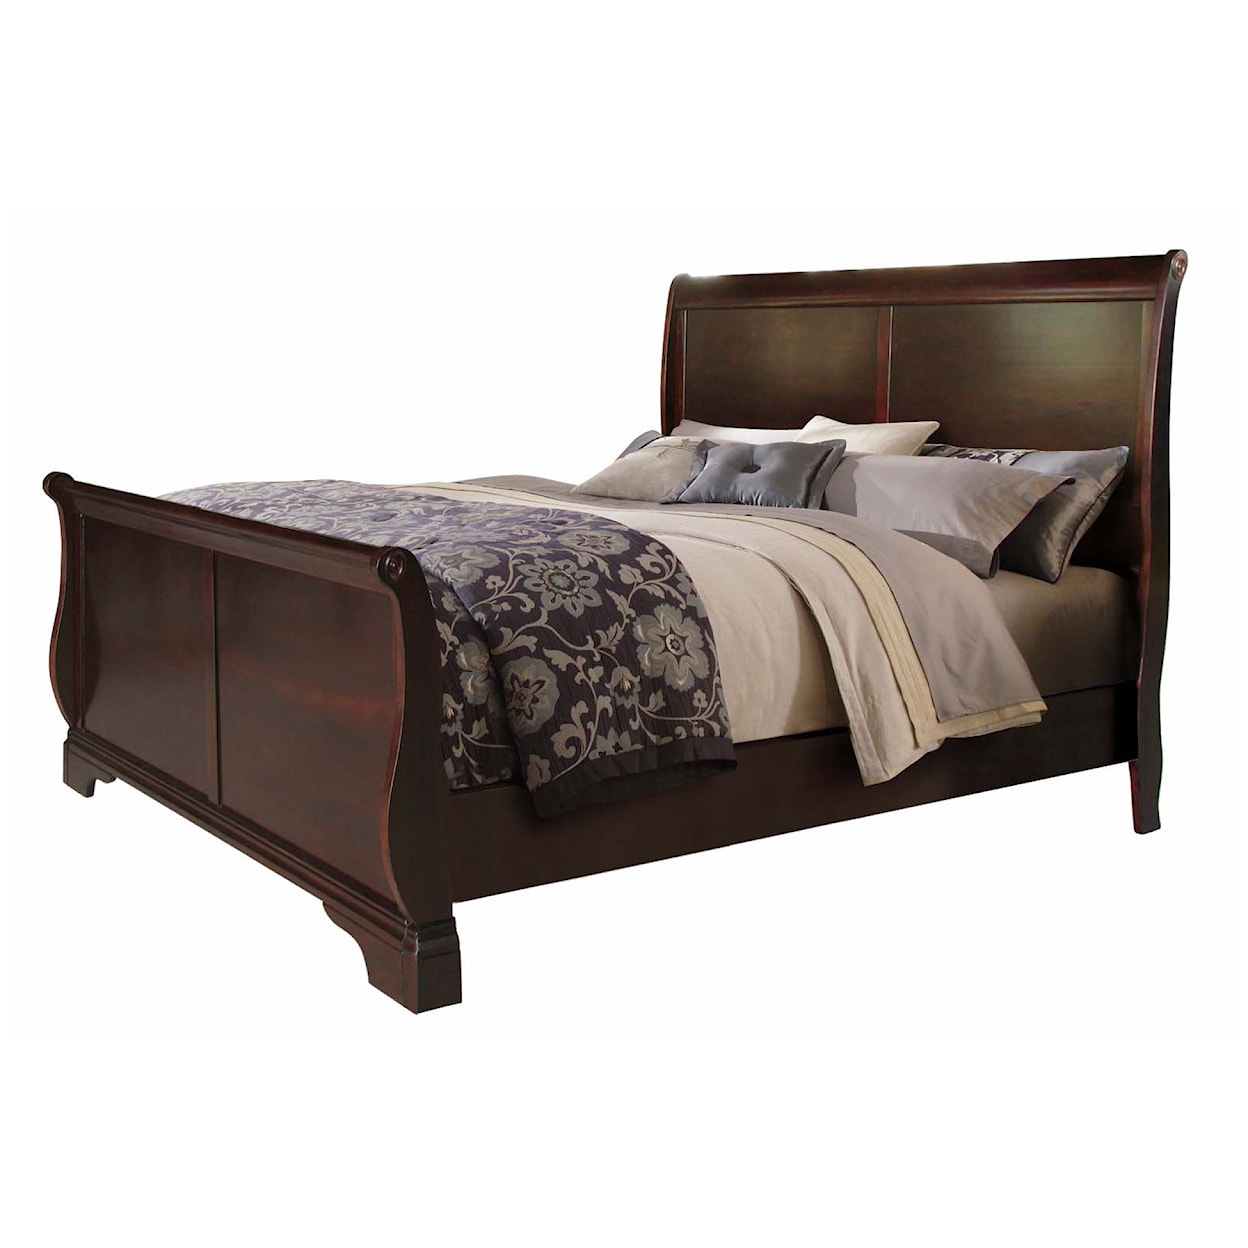 Steve Silver Dominique King Sleigh Bed